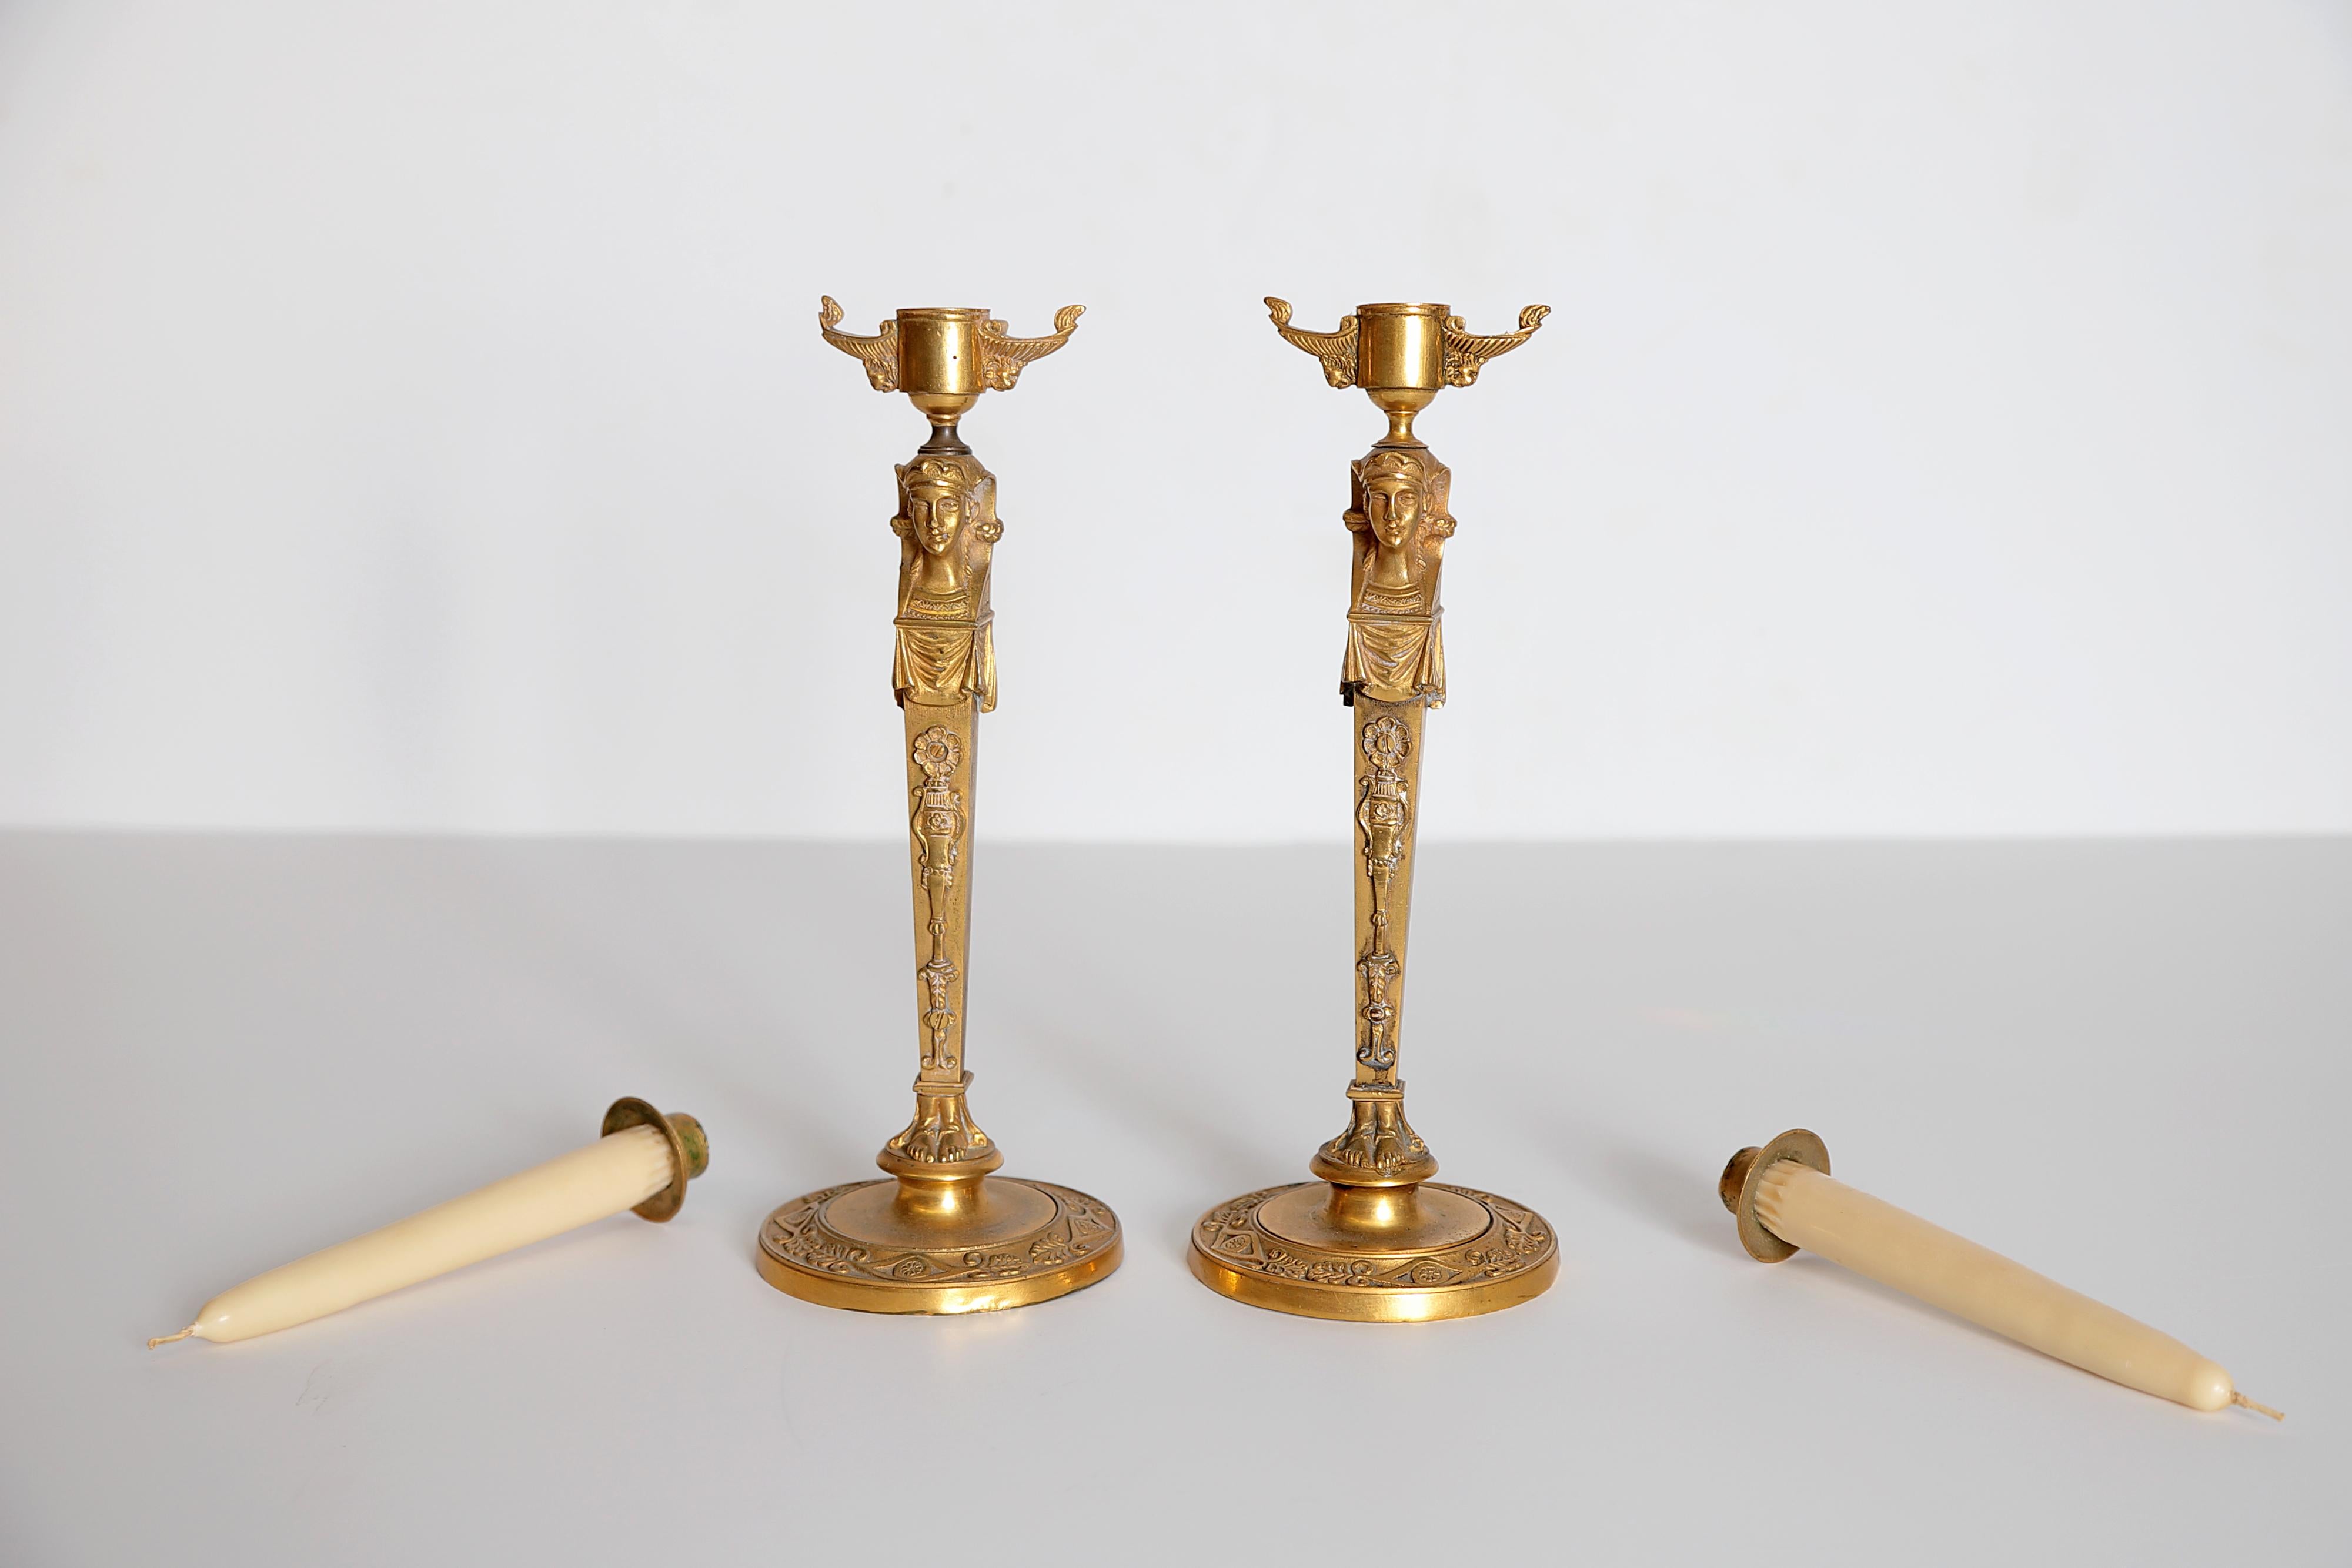 A pair of period Regency gilt bronze candlesticks. Delicate decorations and Egyptian busts at top.